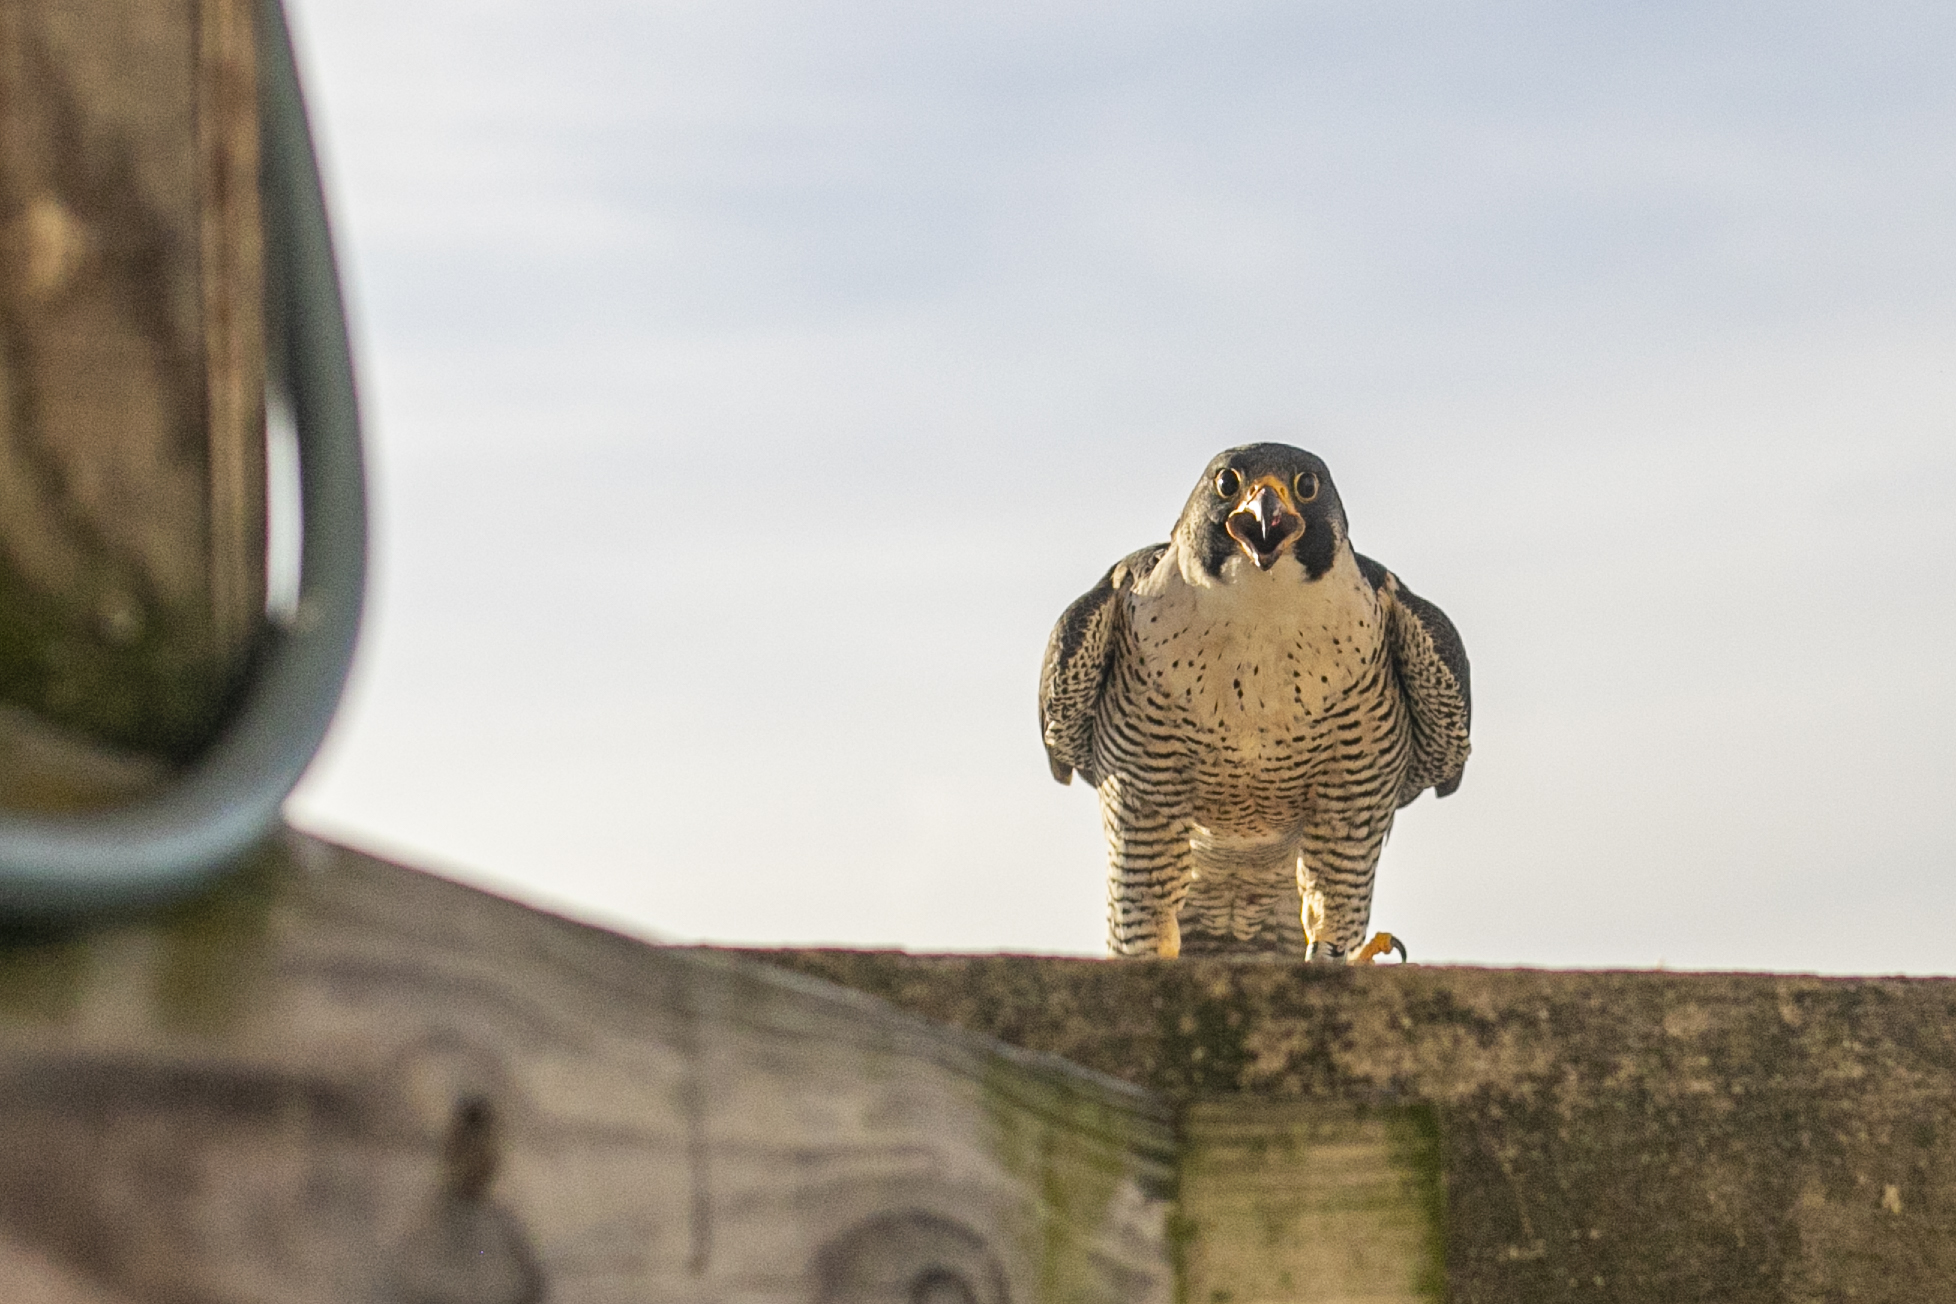 Mother peregrine falcon Rebecca repeatedly shrieks as her three eyases are banded for state and national study by the Michigan Department of Natural Resources in the window well of the Fifth/Third Bank Building in downtown Kalamazoo, Michigan on Monday, May 23, 2022. (Gabi Broekema | MLive.com)